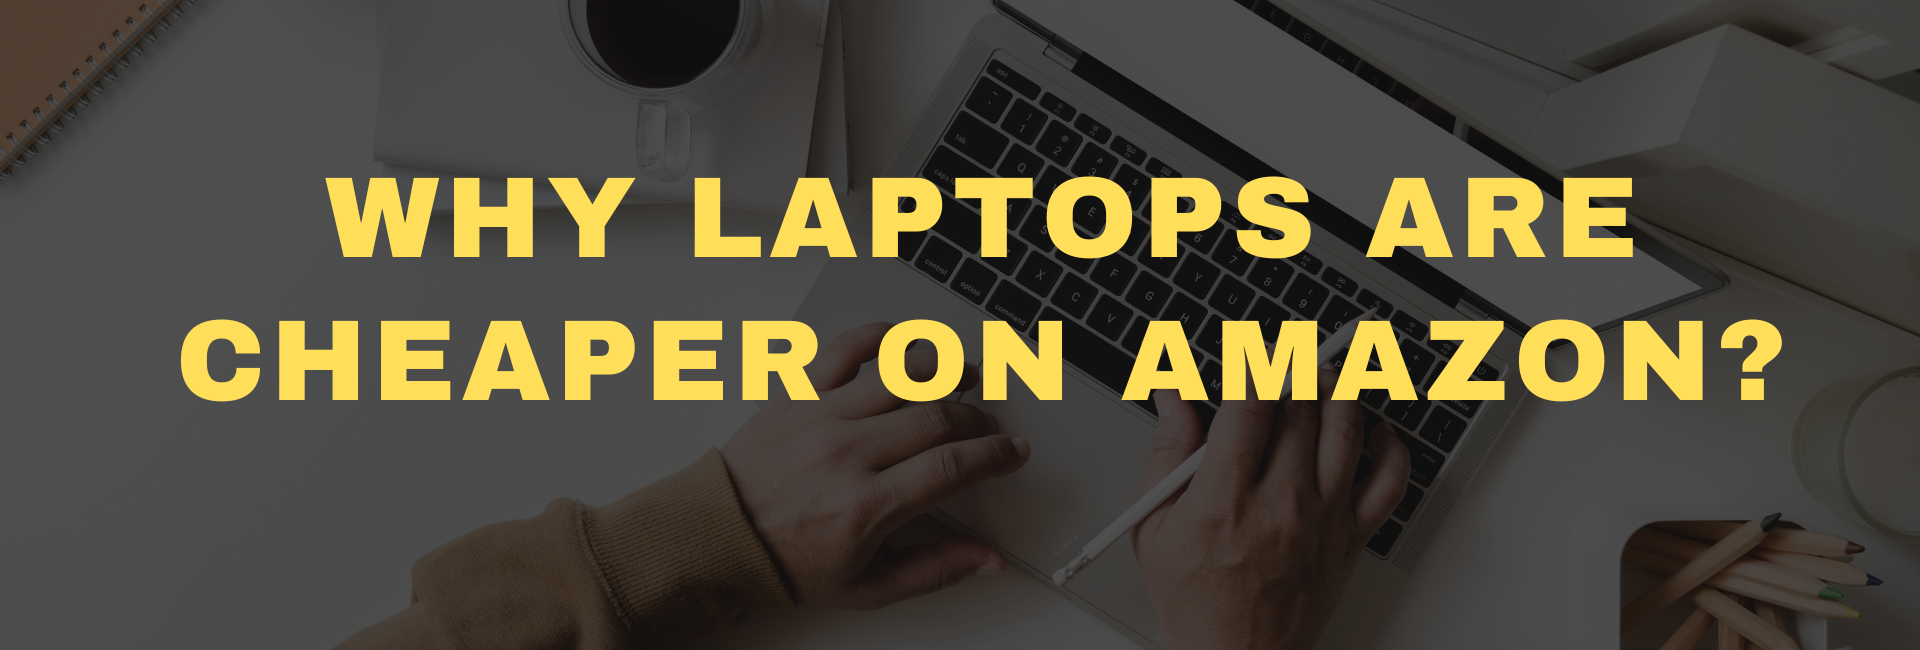 Why are laptops cheaper on Amazon?